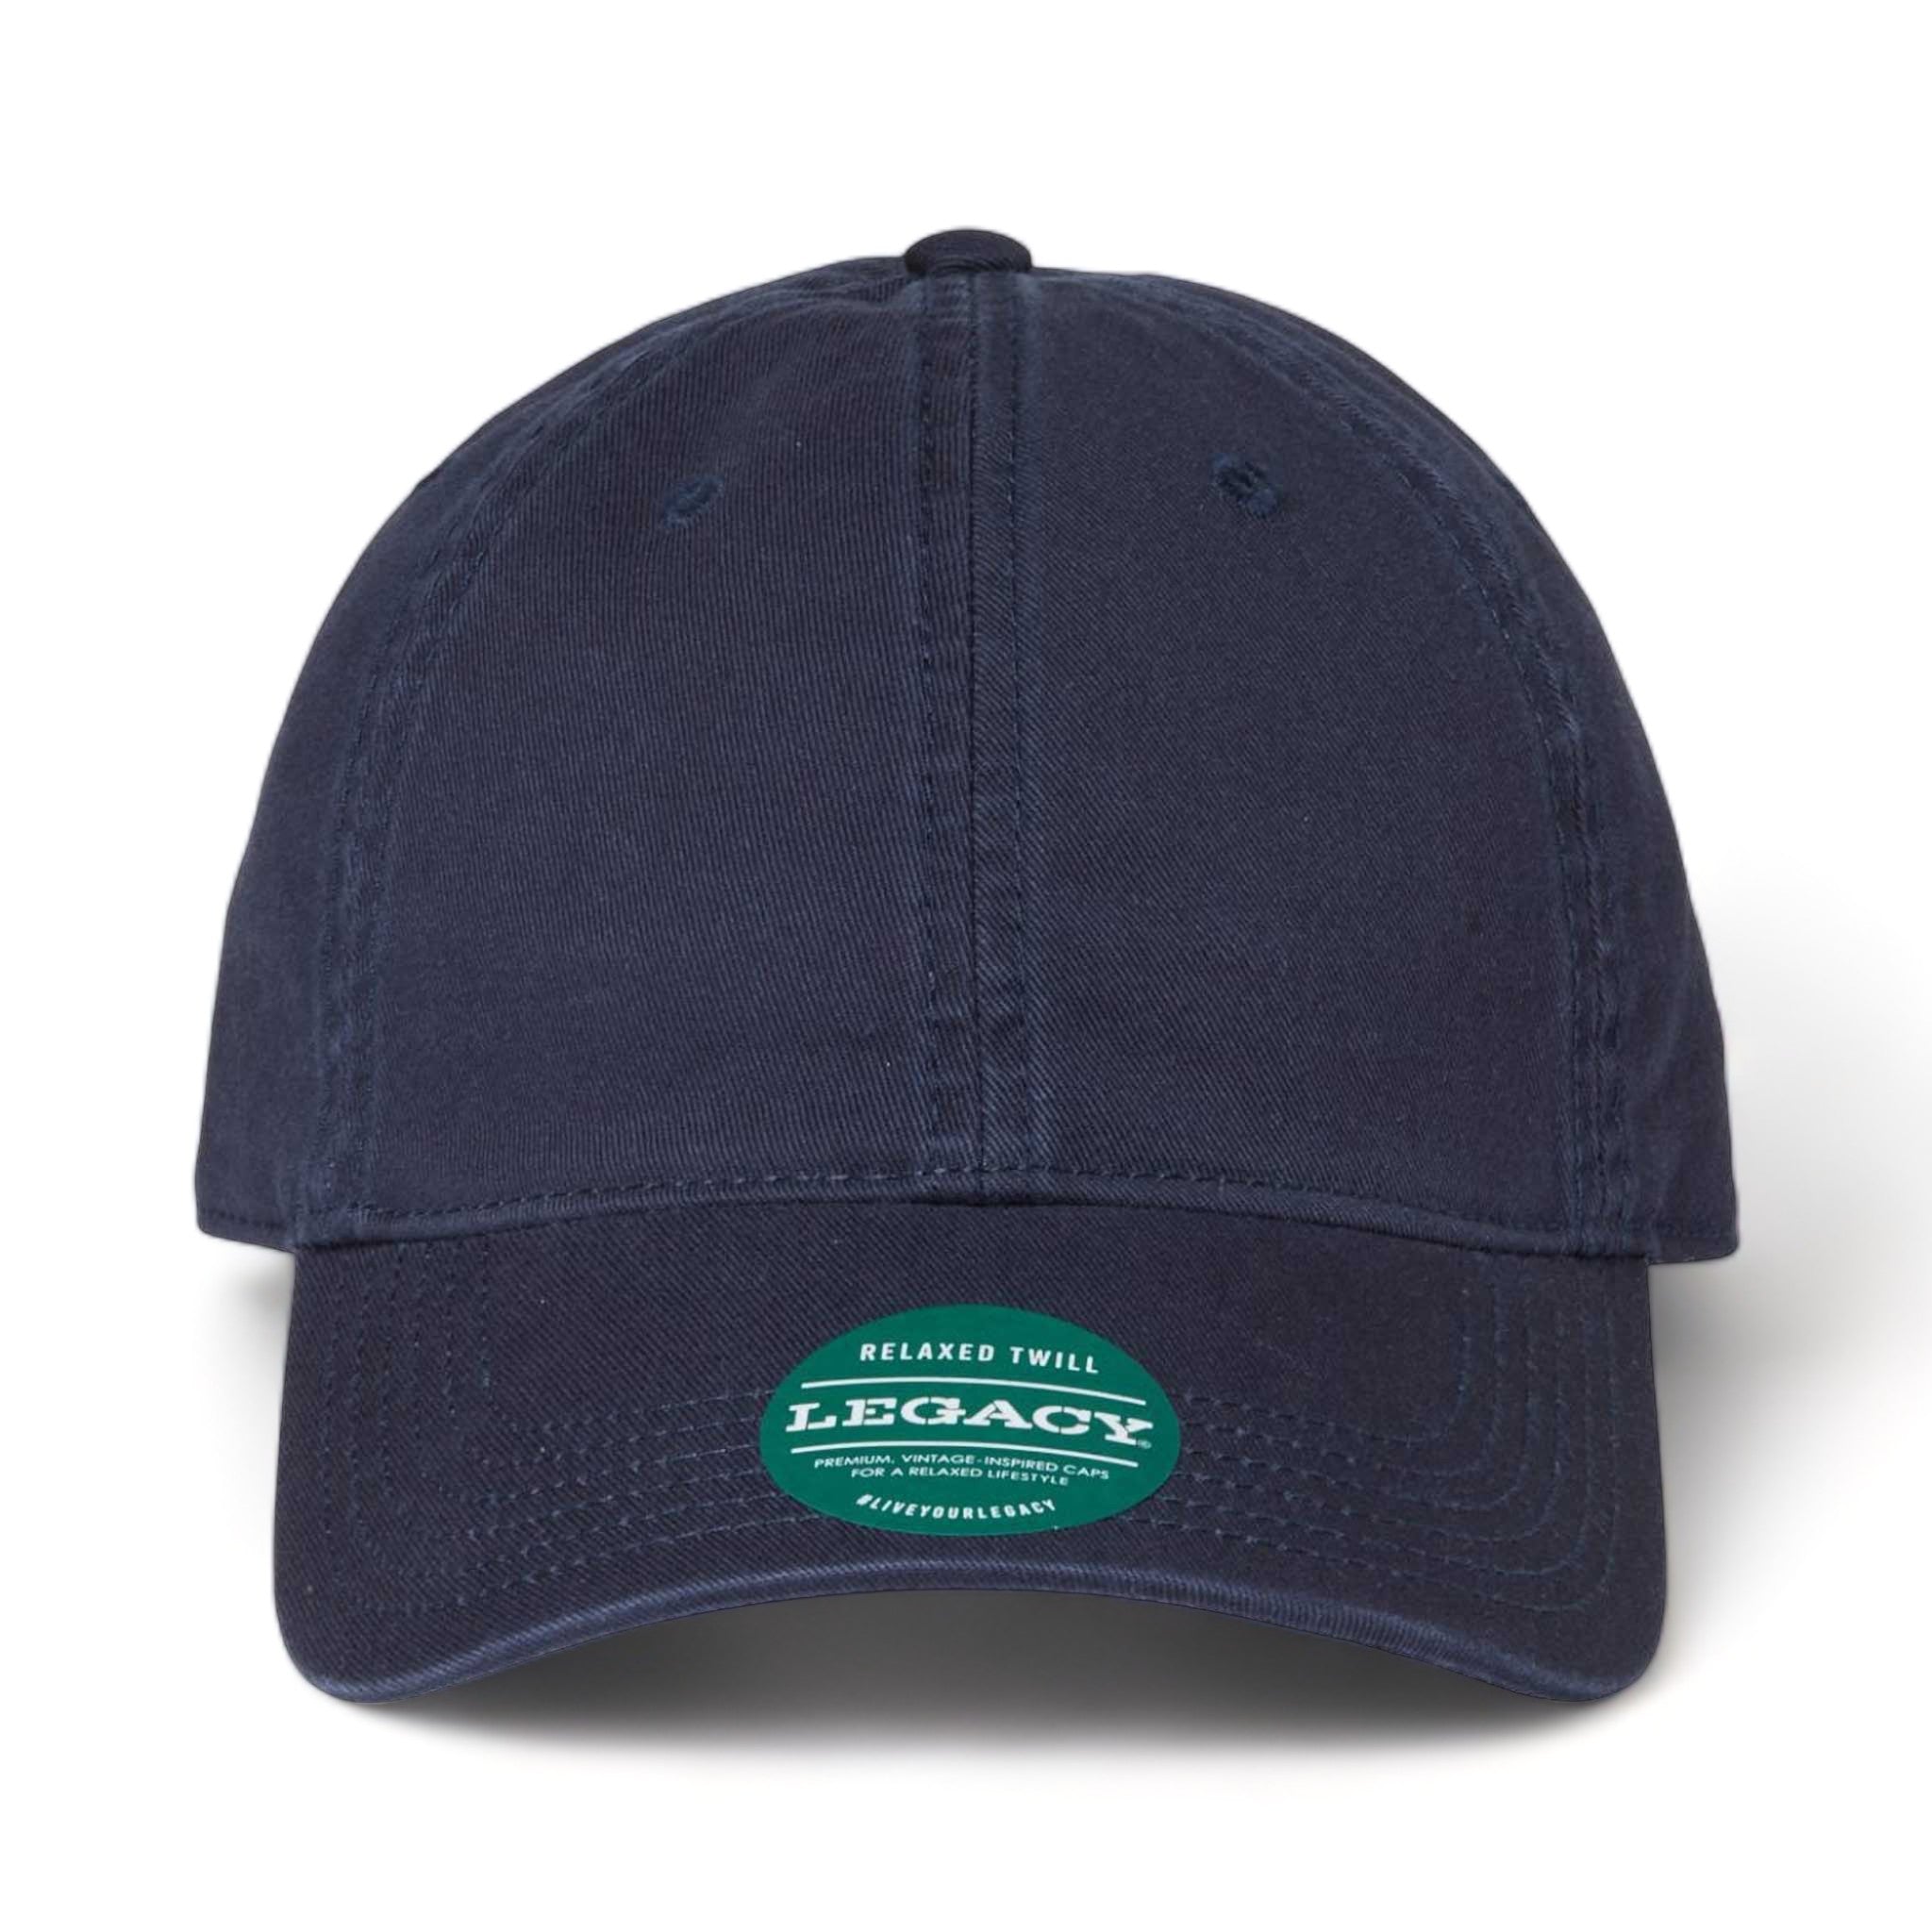 Front view of LEGACY EZA custom hat in navy